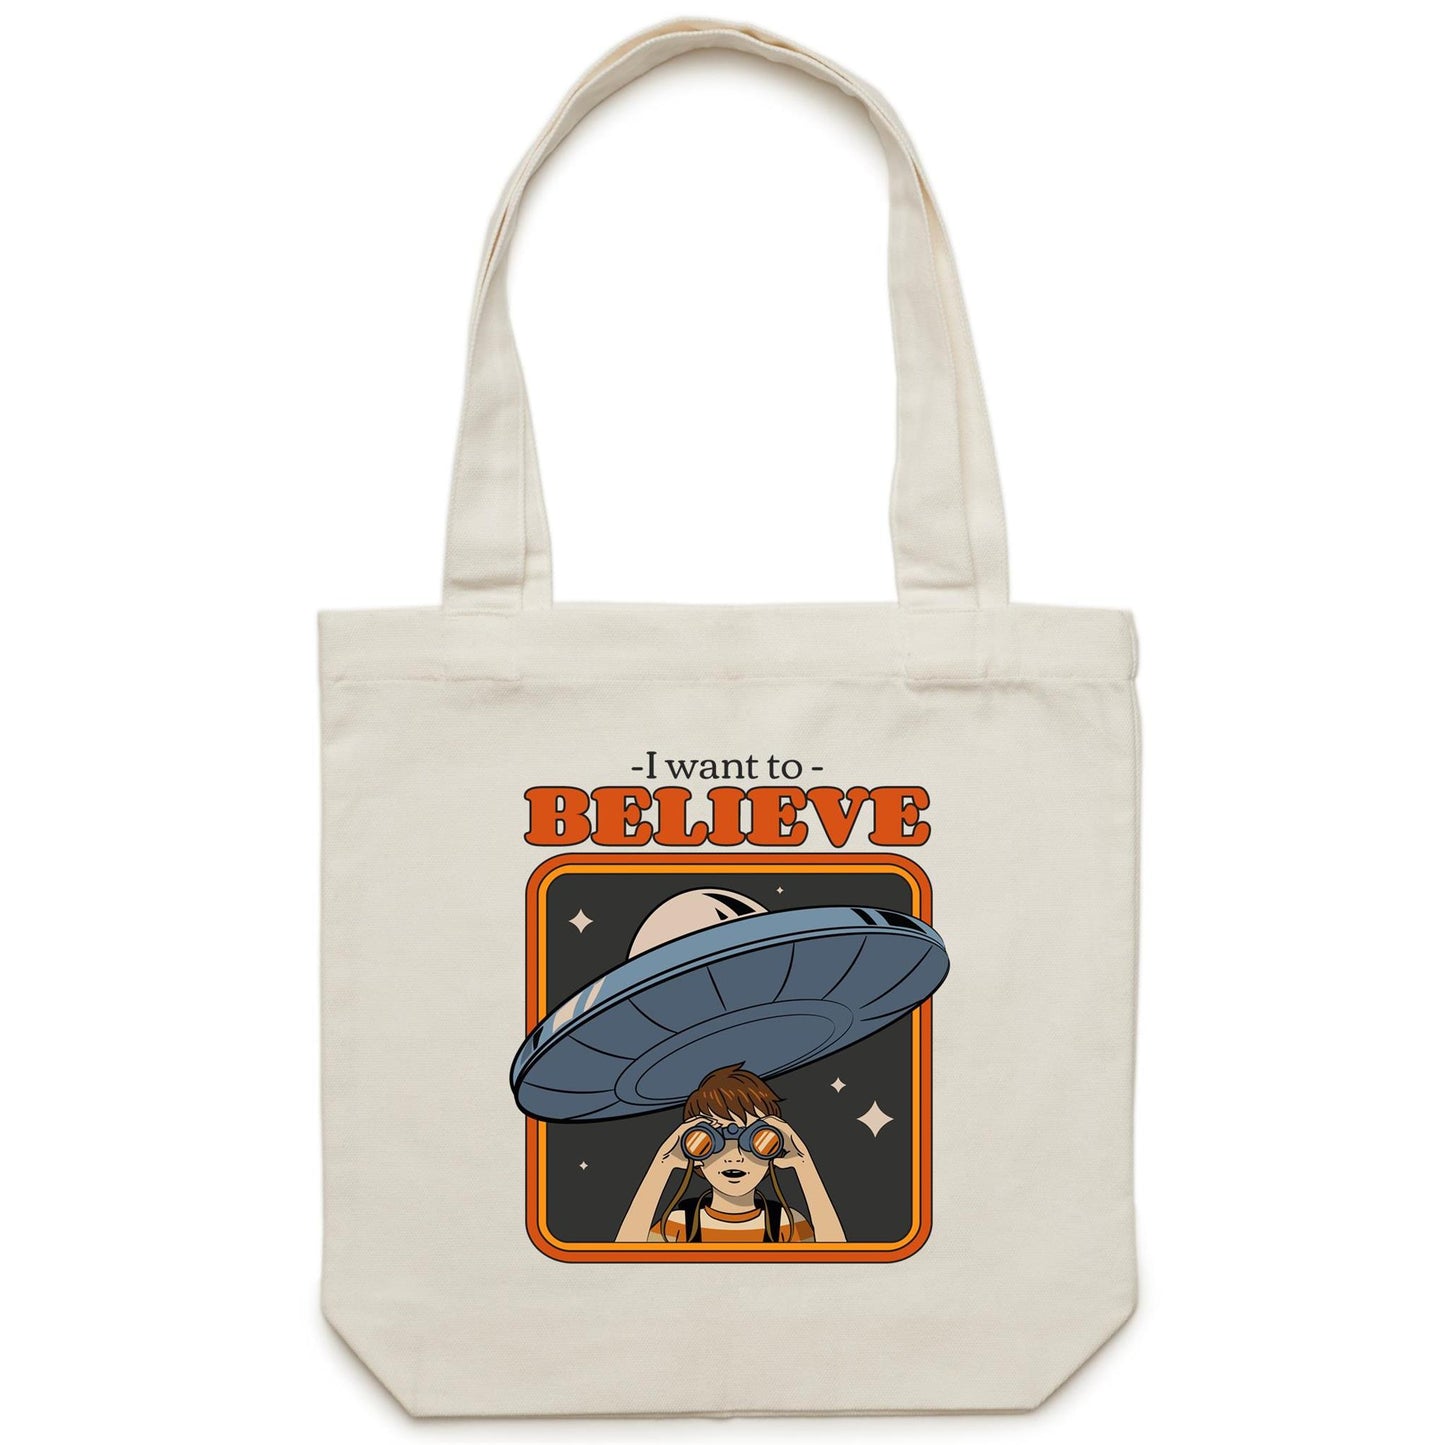 I Want To Believe - Canvas Tote Bag Default Title Tote Bag Sci Fi